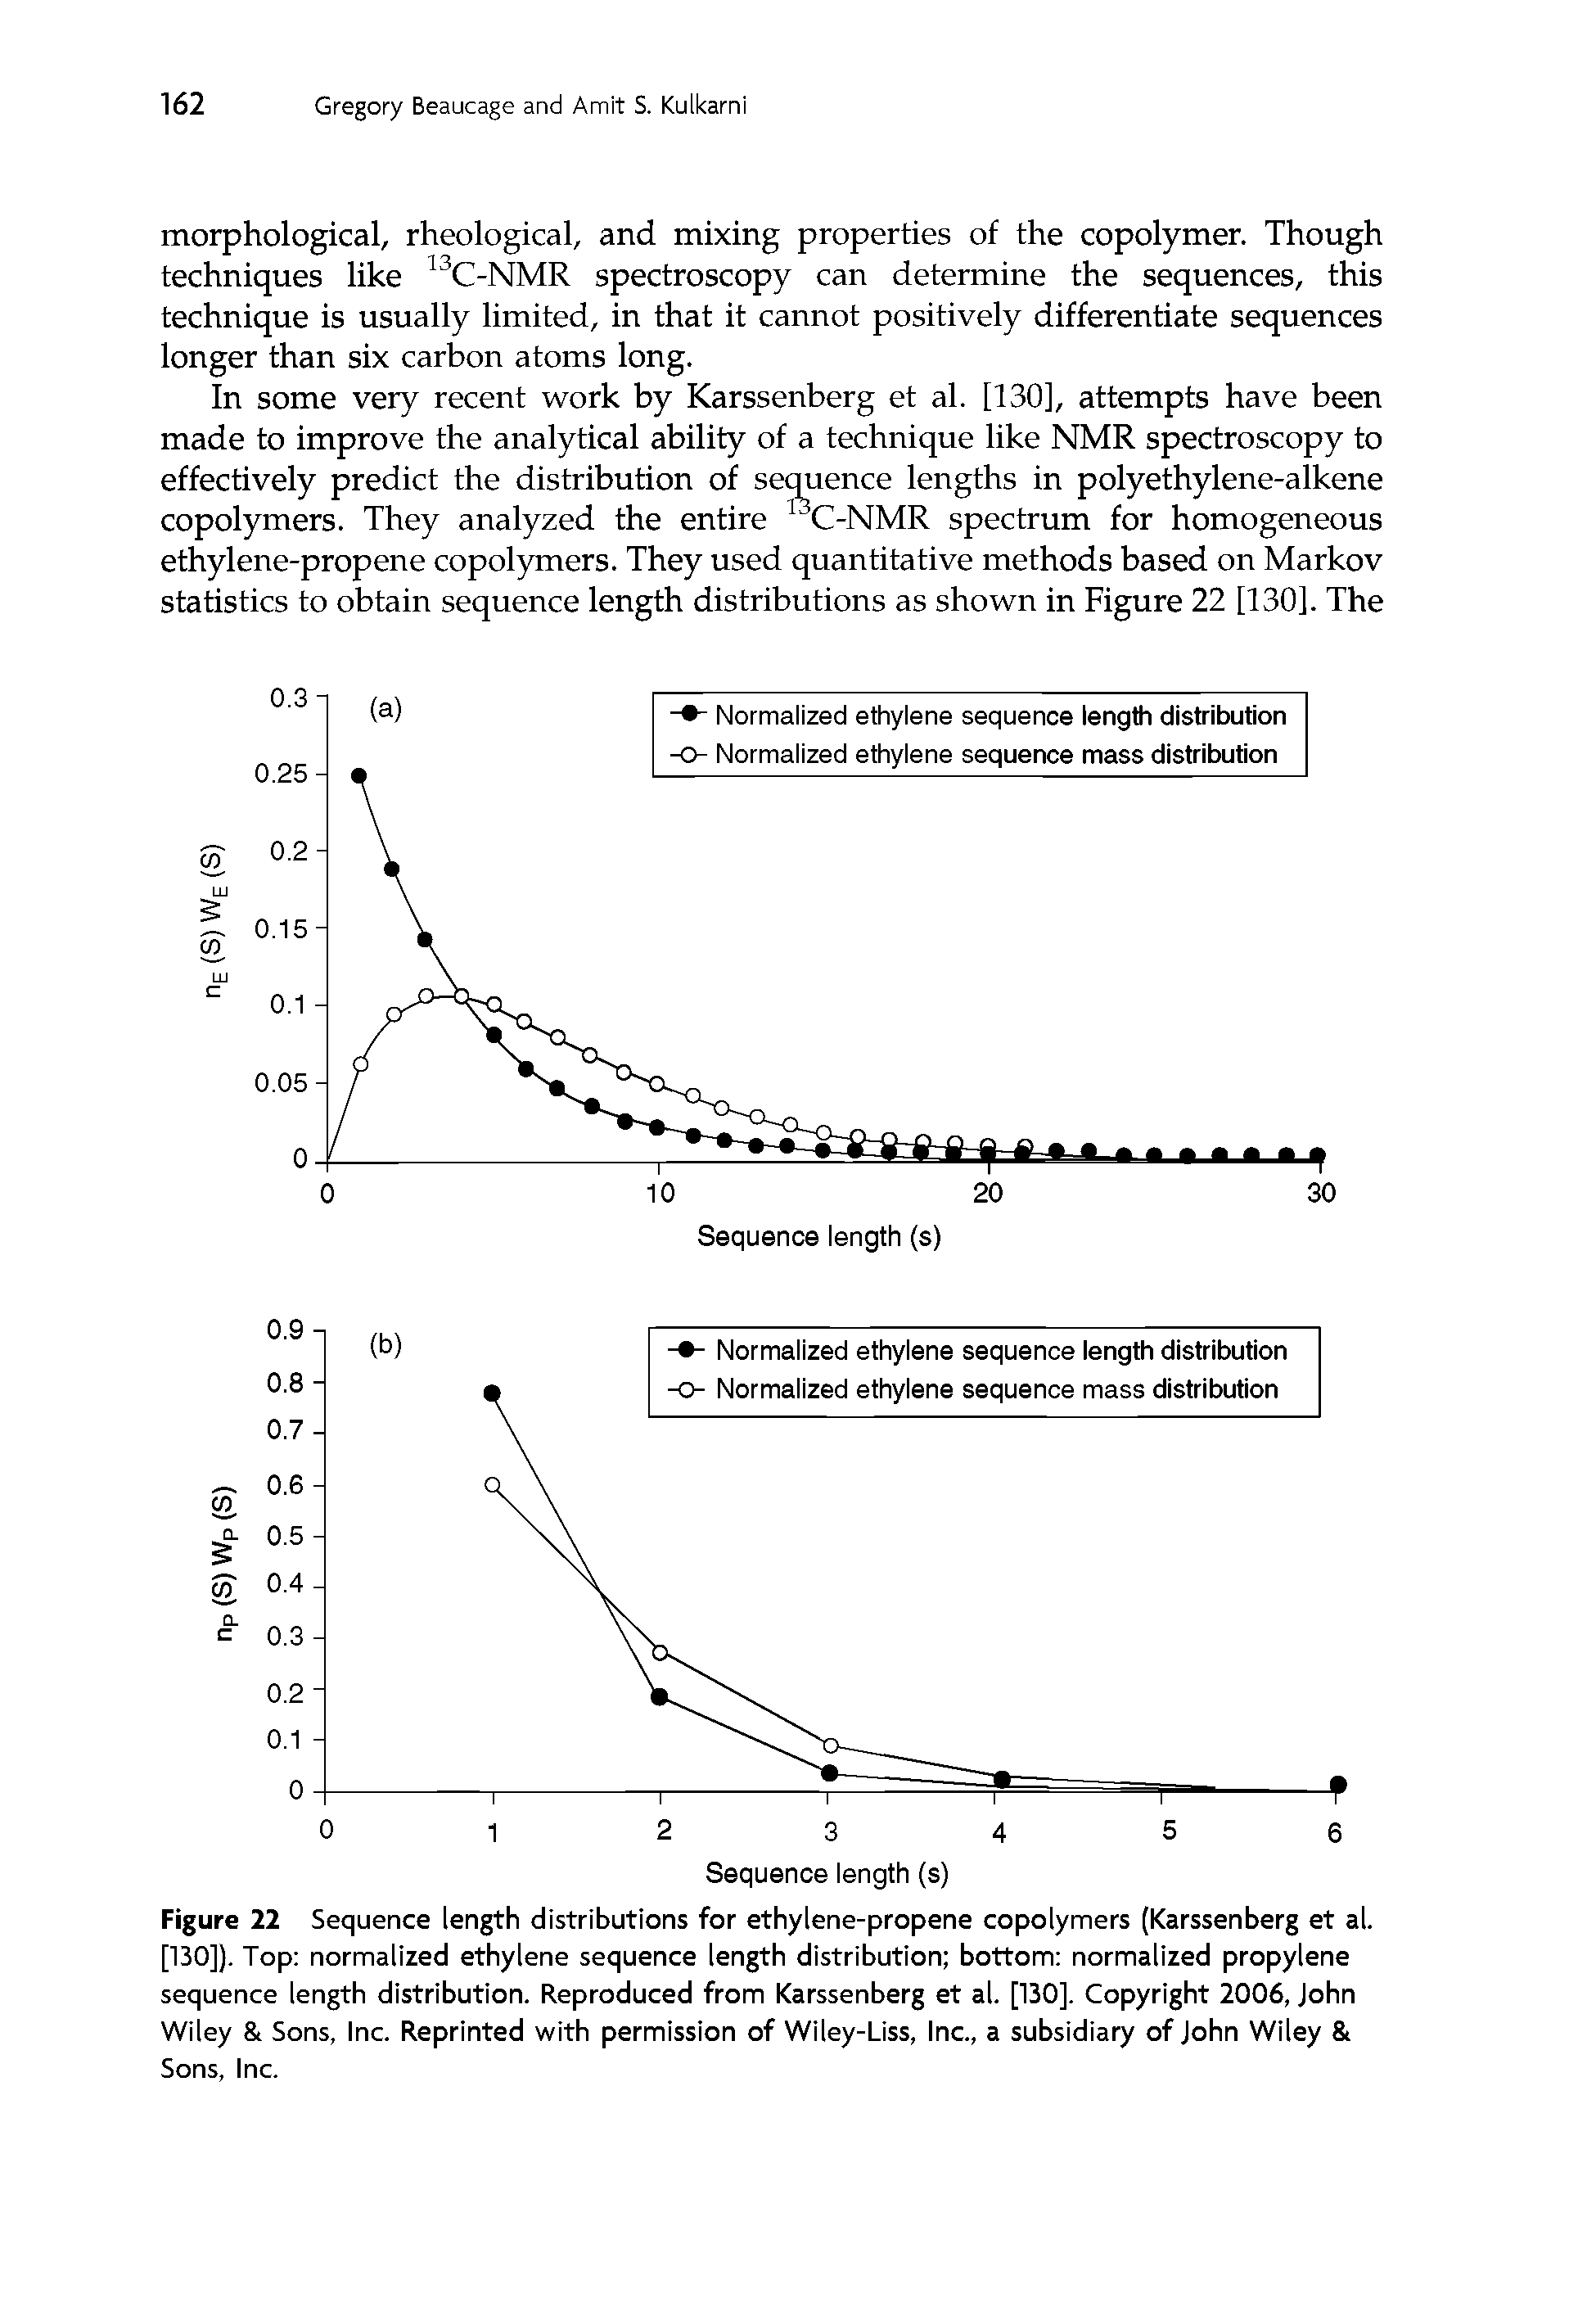 Figure 22 Sequence length distributions for ethylene-propene copolymers (Karssenberg et al. [130]). Top normalized ethylene sequence length distribution bottom normalized propylene sequence length distribution. Reproduced from Karssenberg et al. [130]. Copyright 2006, John Wiley Sons, Inc. Reprinted with permission of Wiley-Liss, Inc., a subsidiary of John Wiley Sons, Inc.